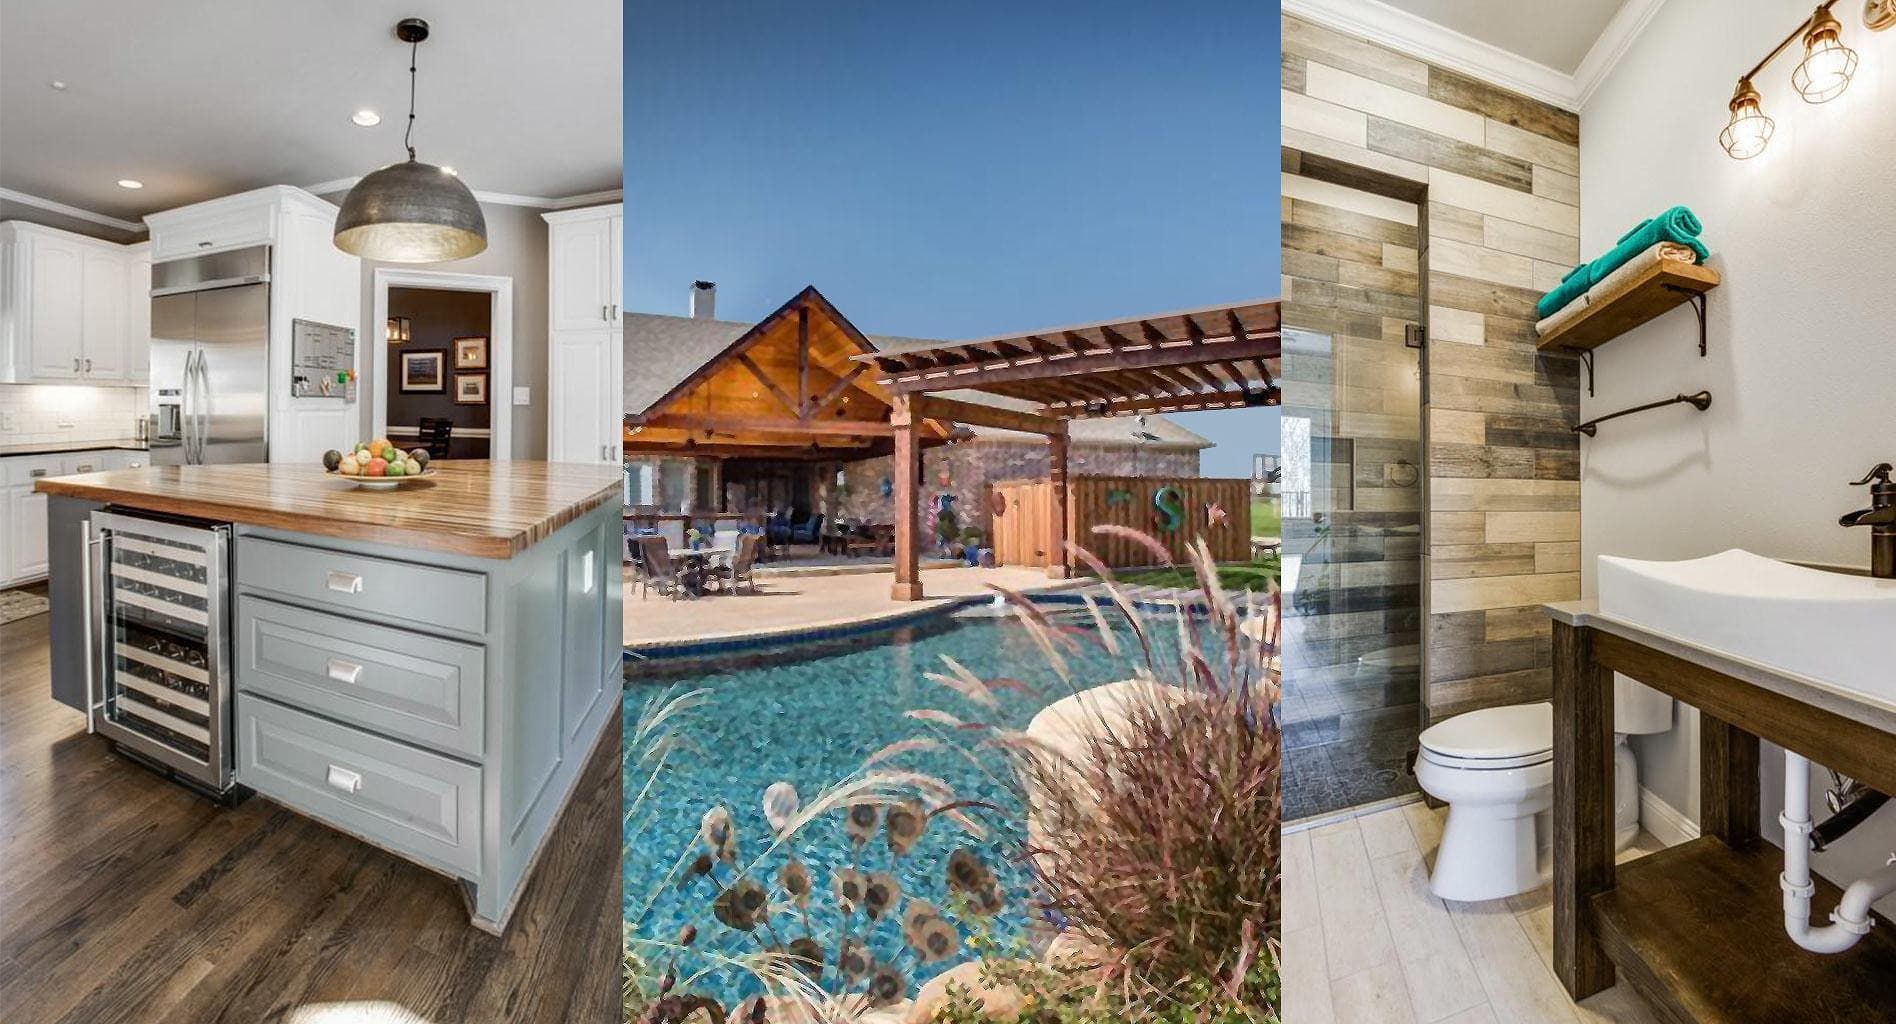 a kitchen outdoor living area and luxury bathroom